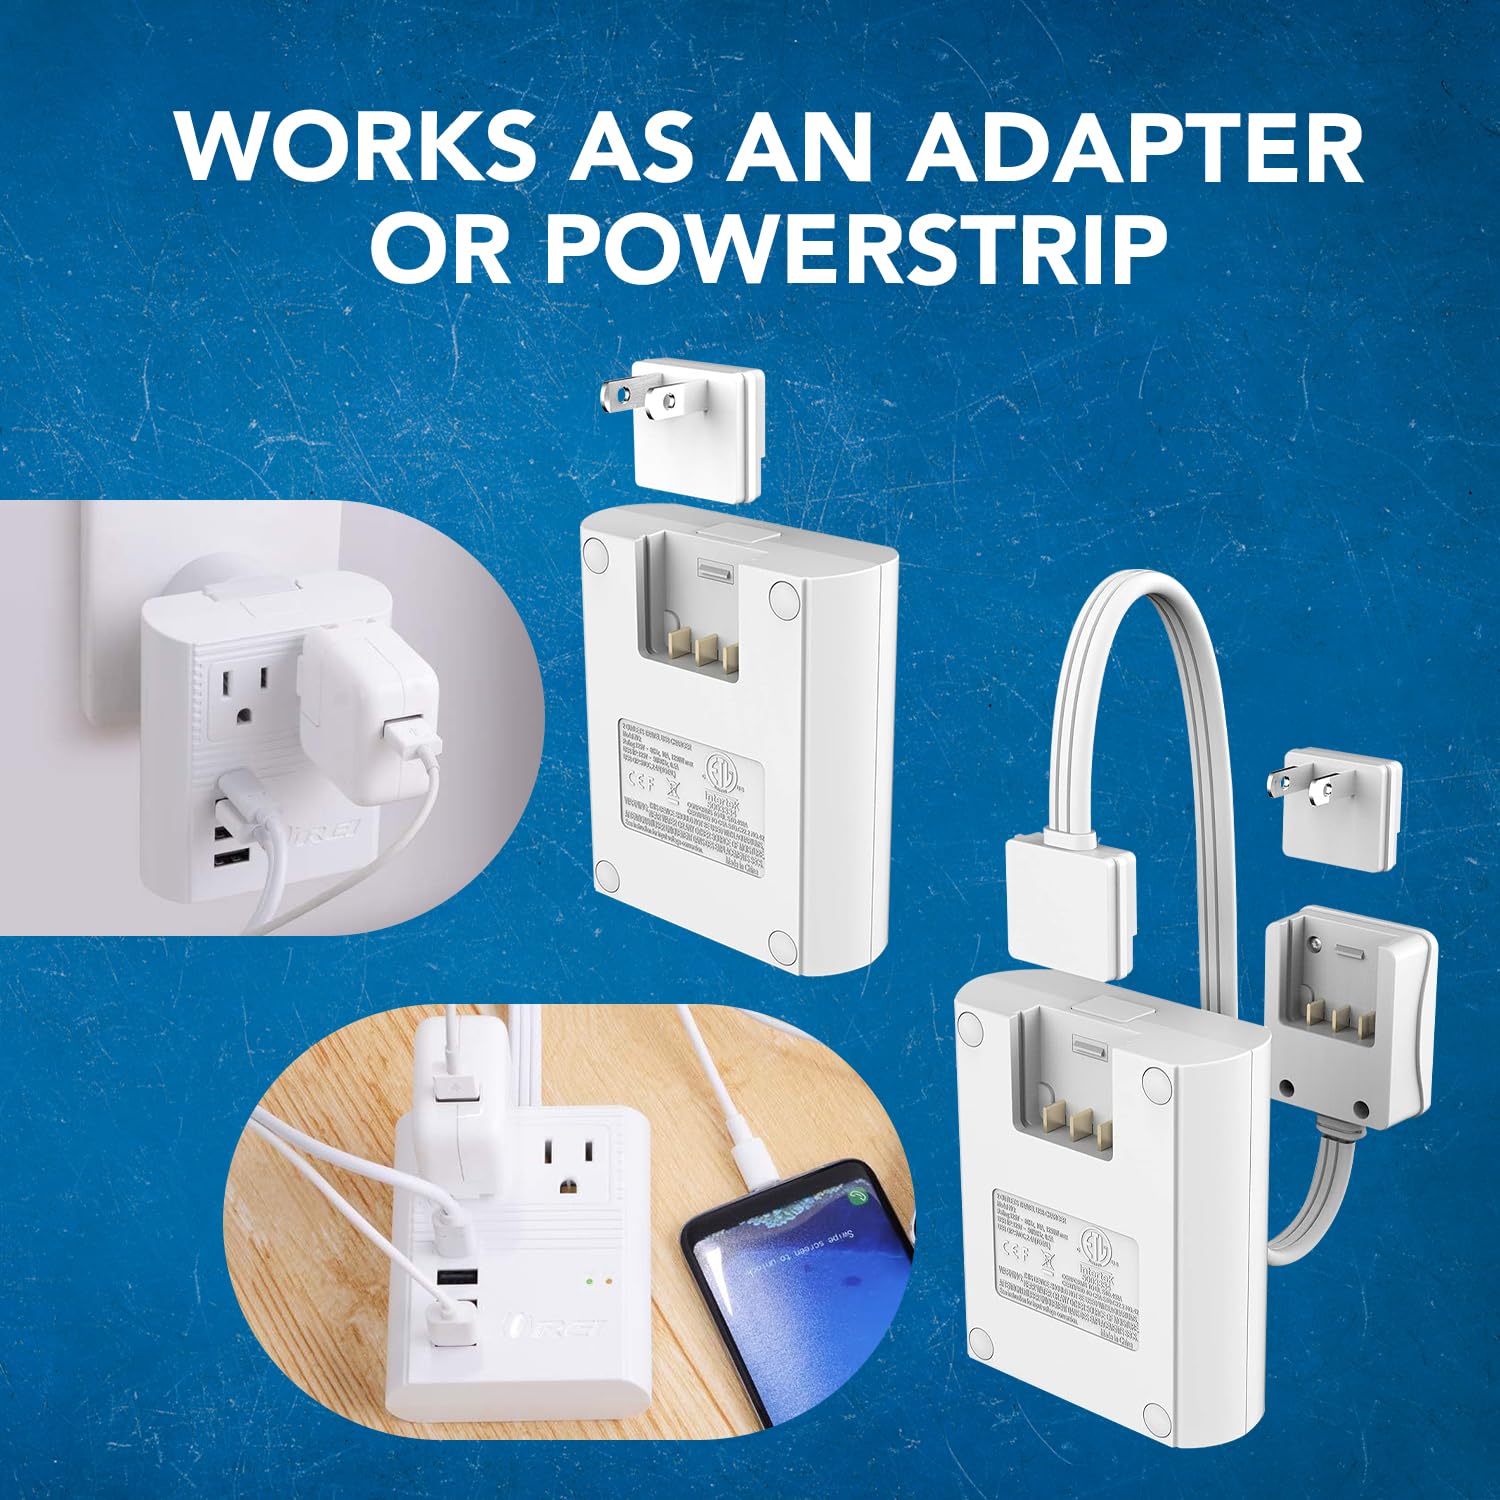 OREI World Travel Plug Adapter M8 Max, 3 USB + Pd 18W USB-C Input - 2 USA Outlets - Attachments for Europe, Asia, China, Japan, Africa - Perfect for Cell Phones, Tablets, Cameras and More